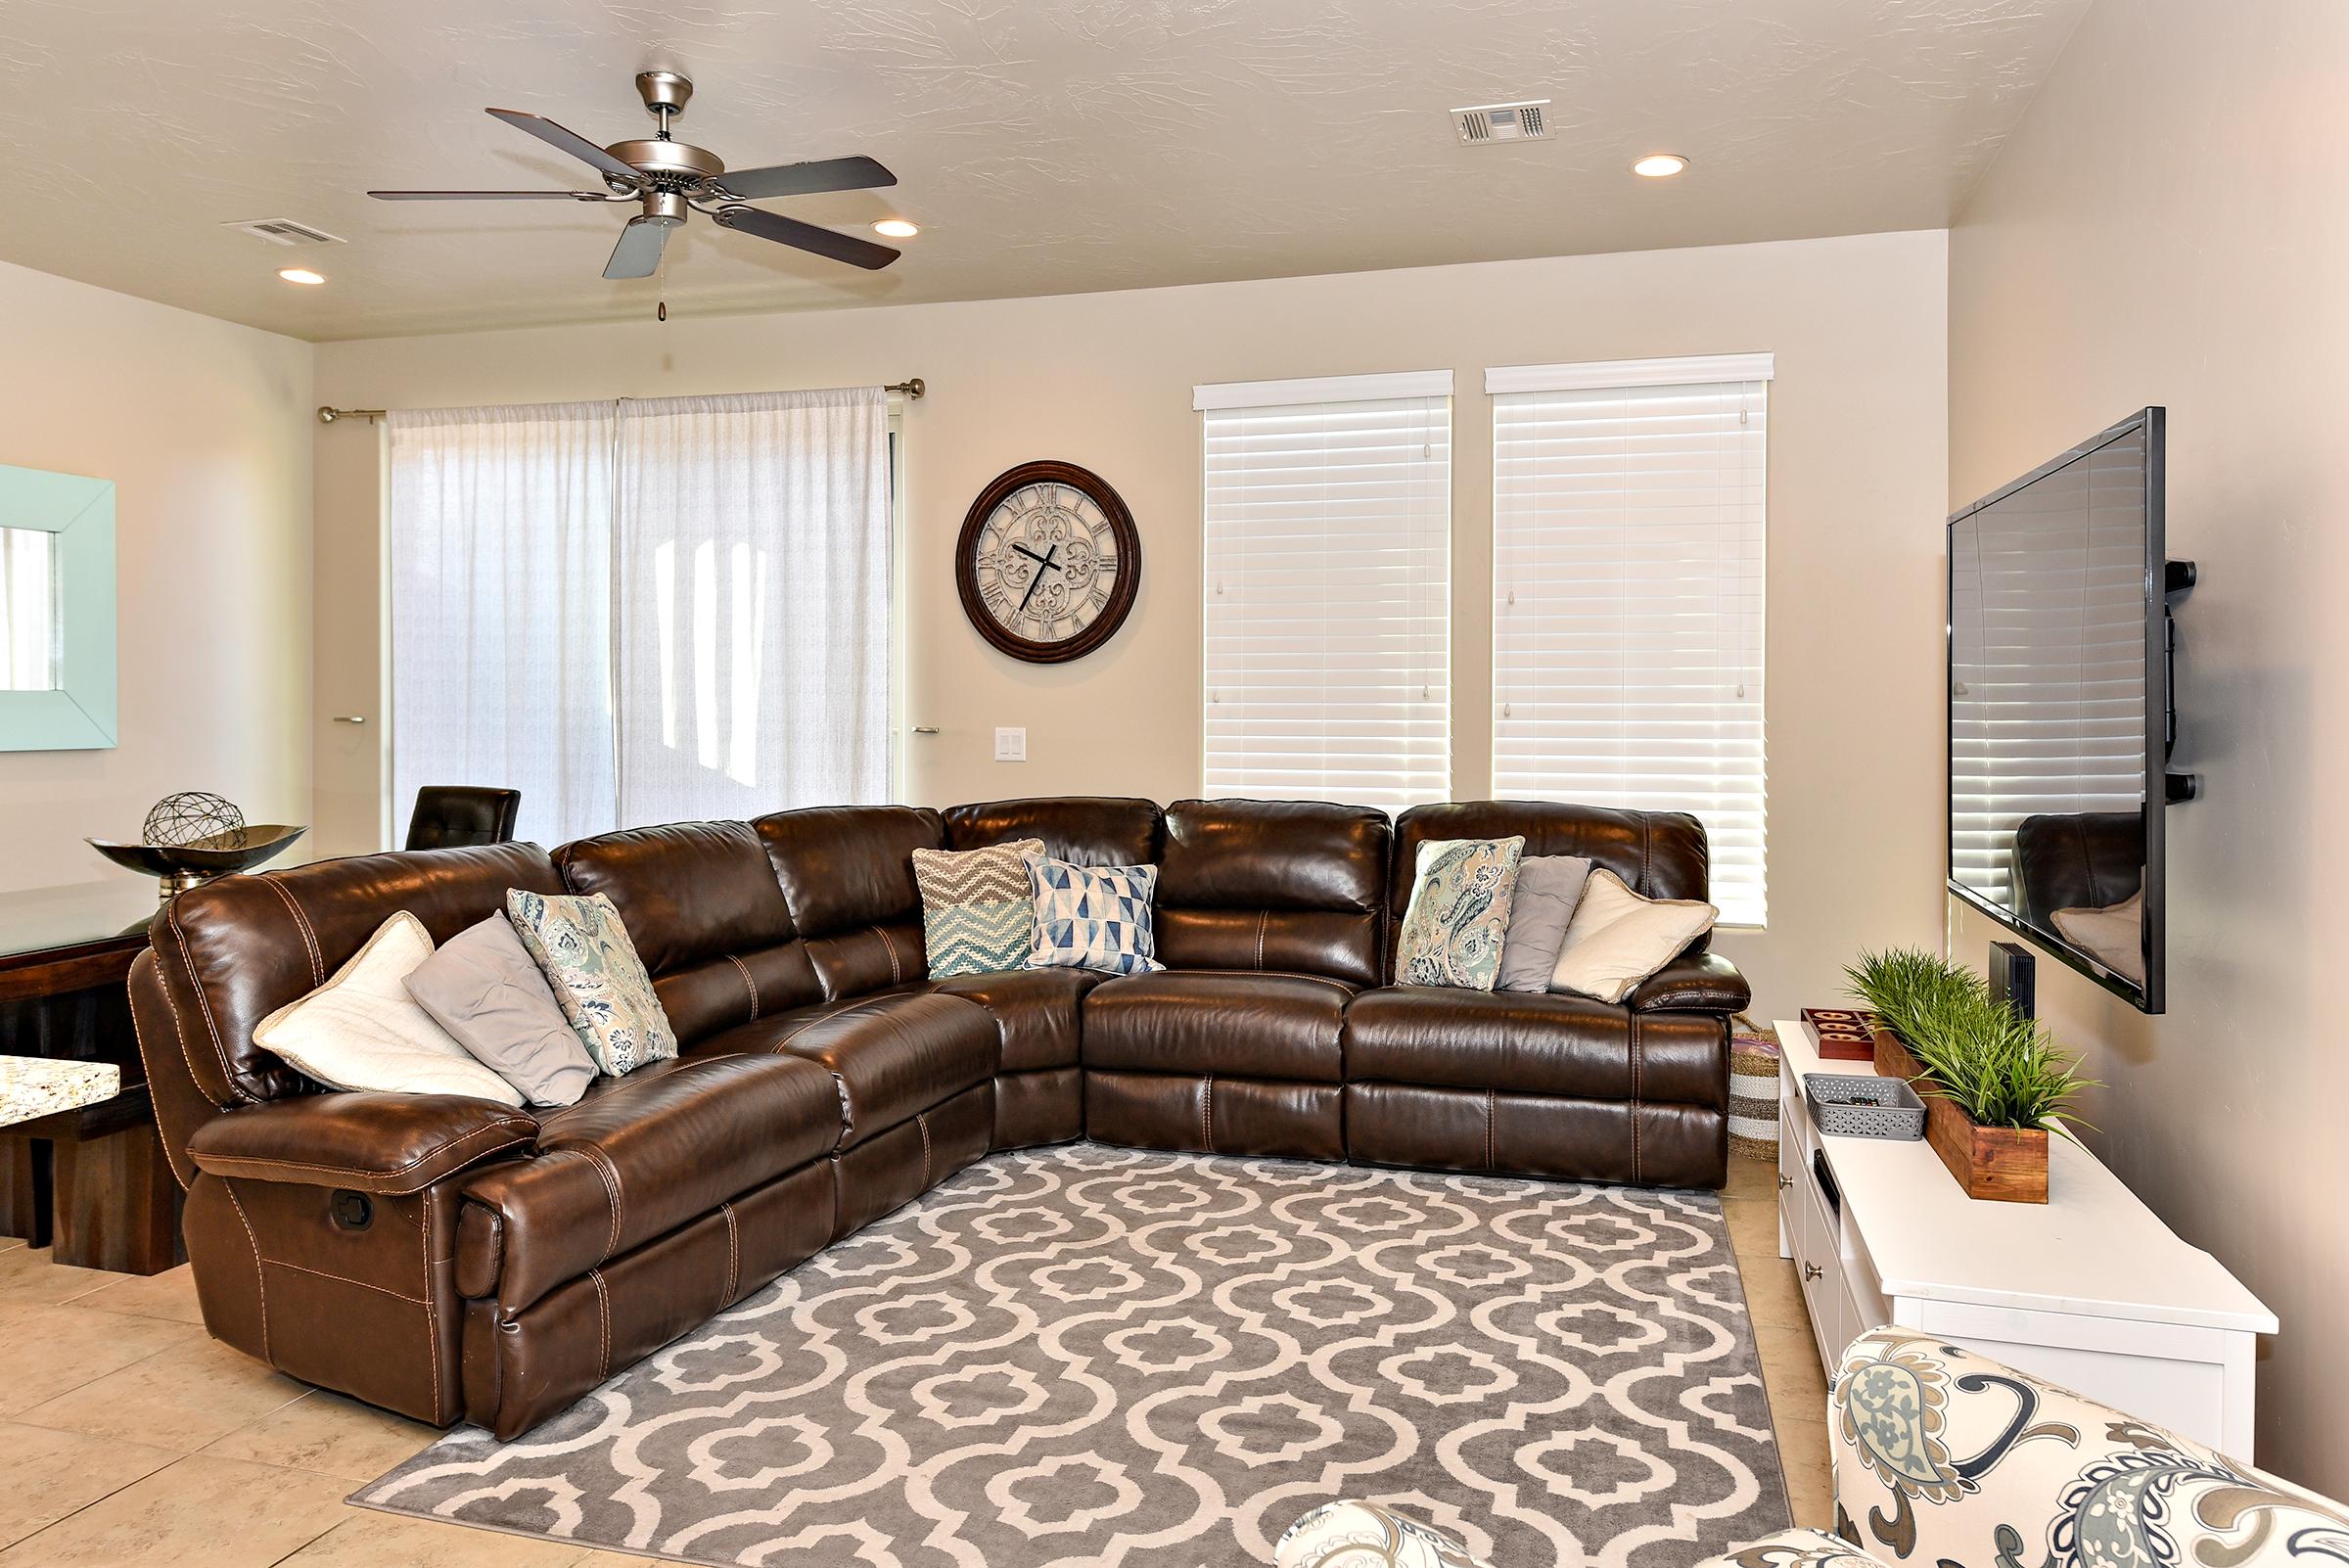 The living room is conveniently adjacent to the kitchen. There is also access to the back patio which has a BBQ grille suitable for all your favorite BBQ dishes.